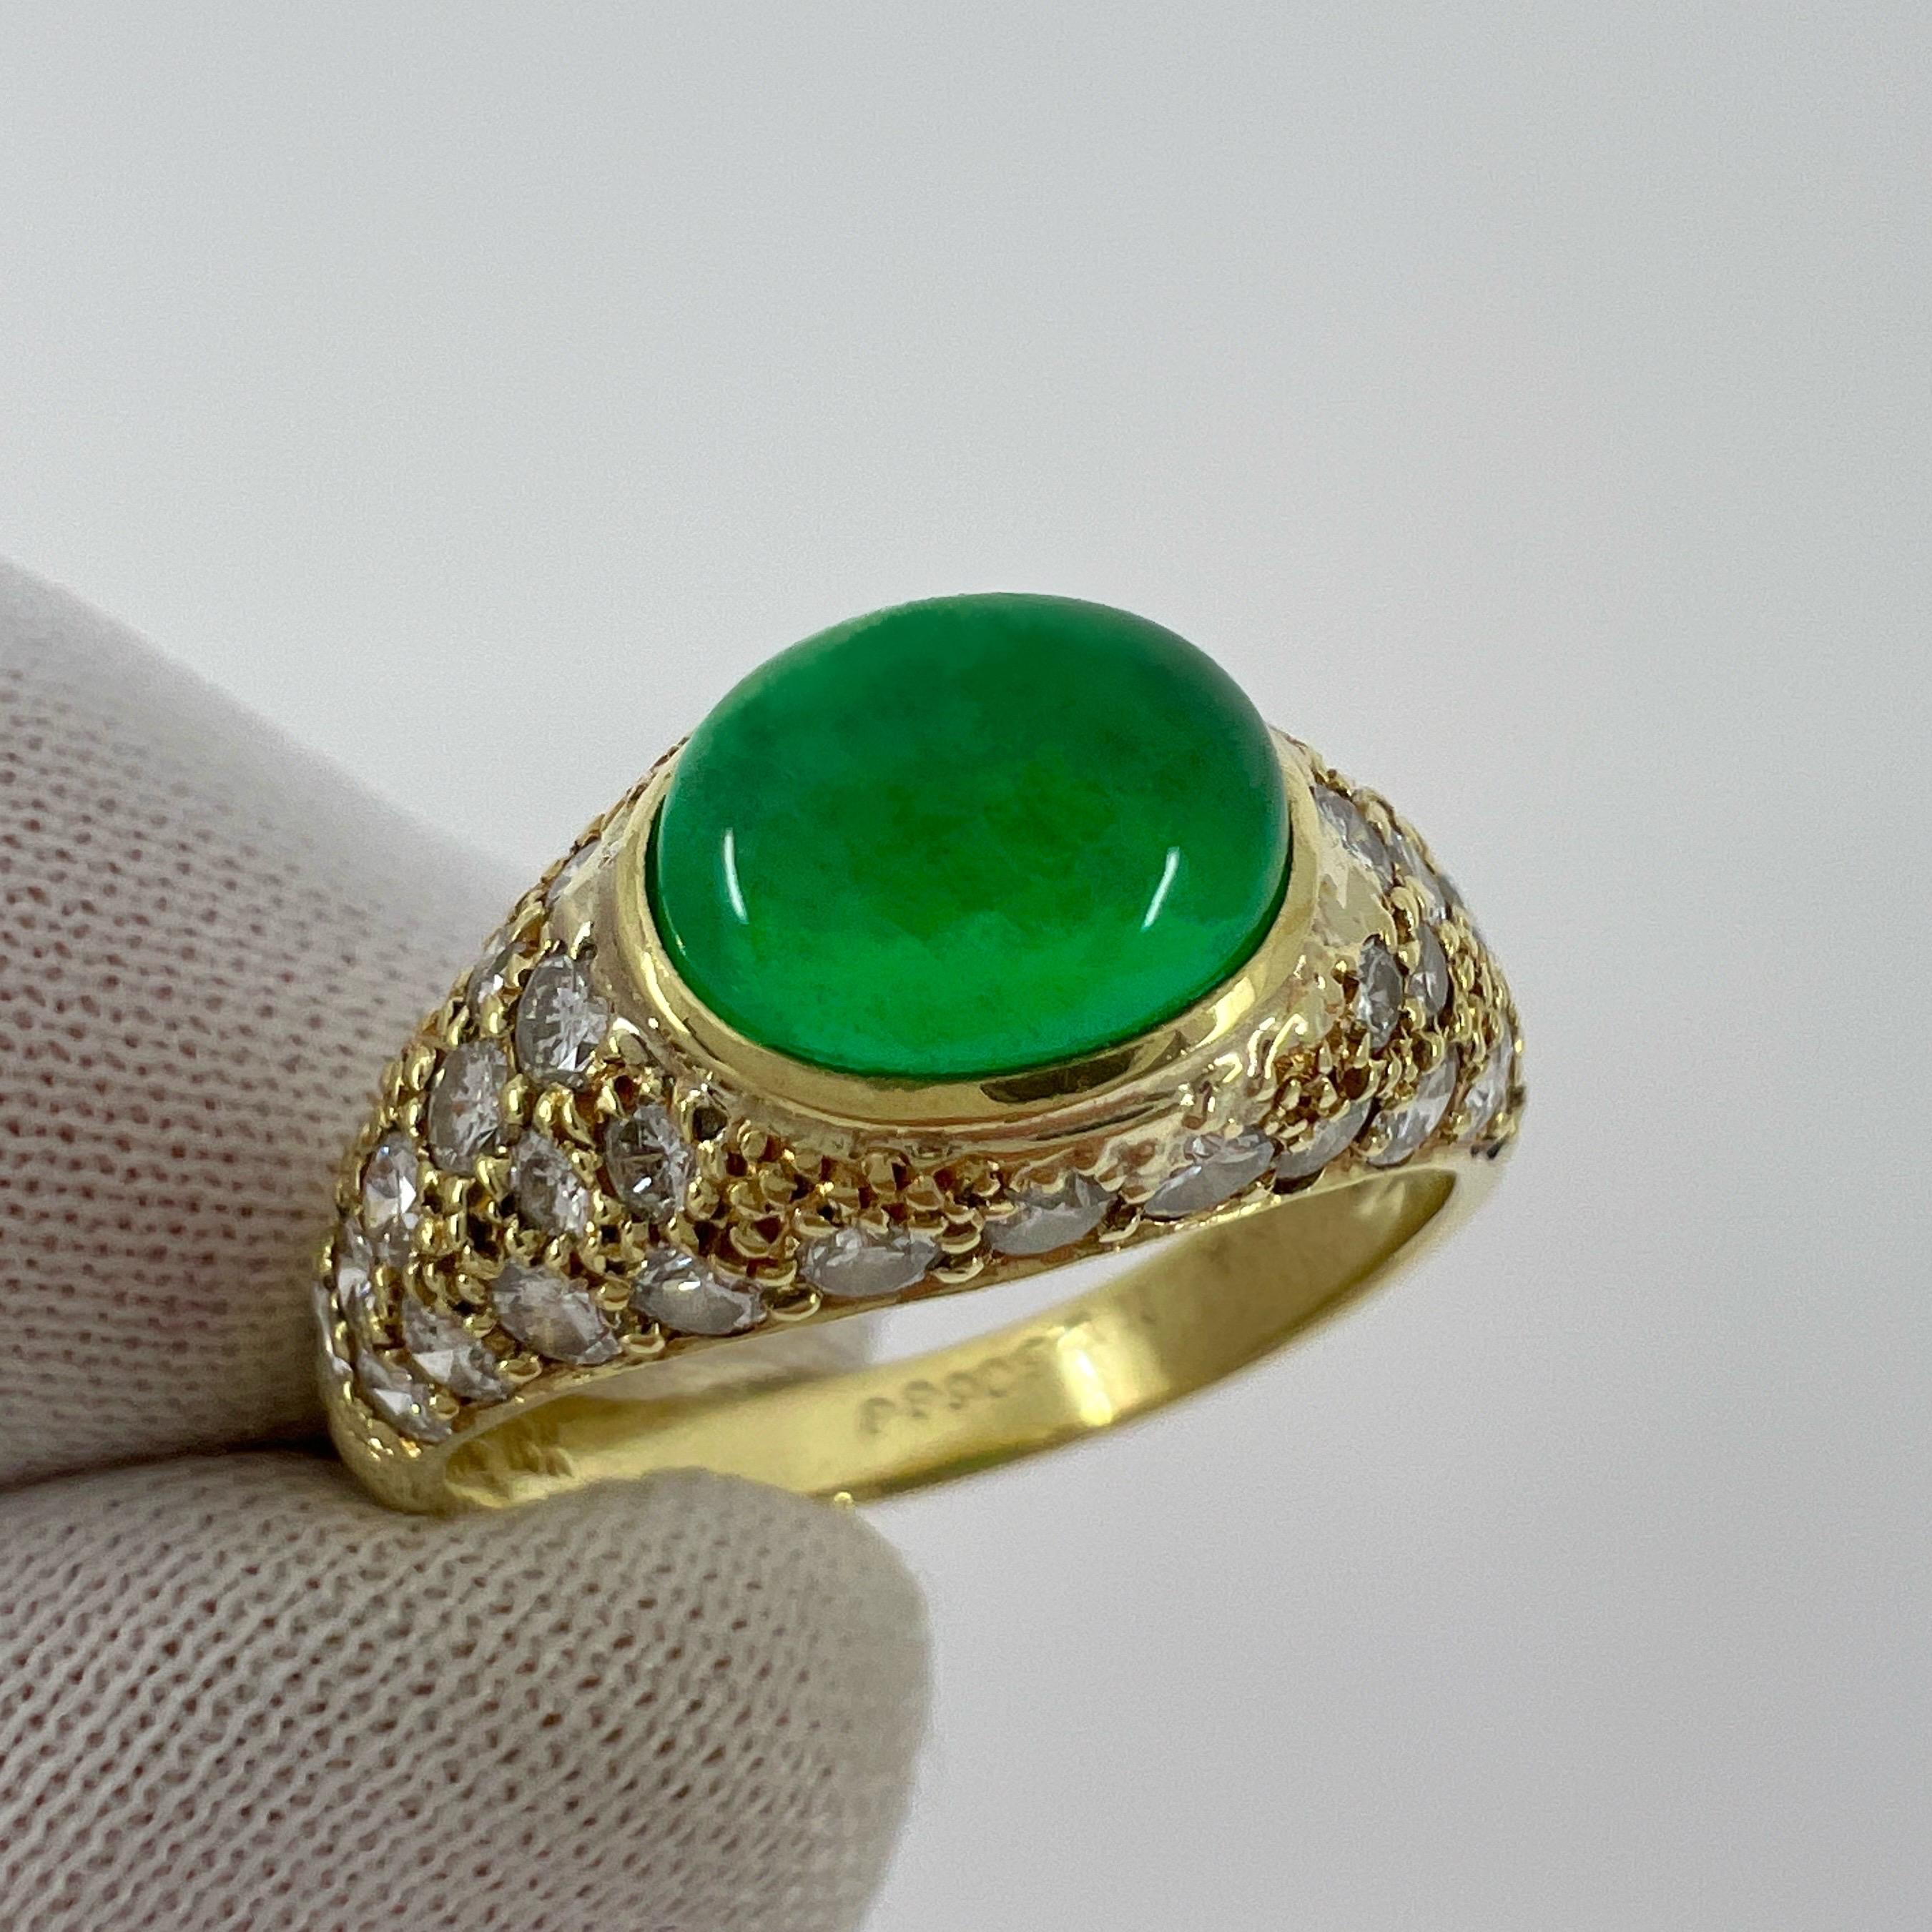 Rare Vintage Van Cleef & Arpels 2 Carat Emerald And Diamond Cocktail Dome Ring In Excellent Condition For Sale In Birmingham, GB